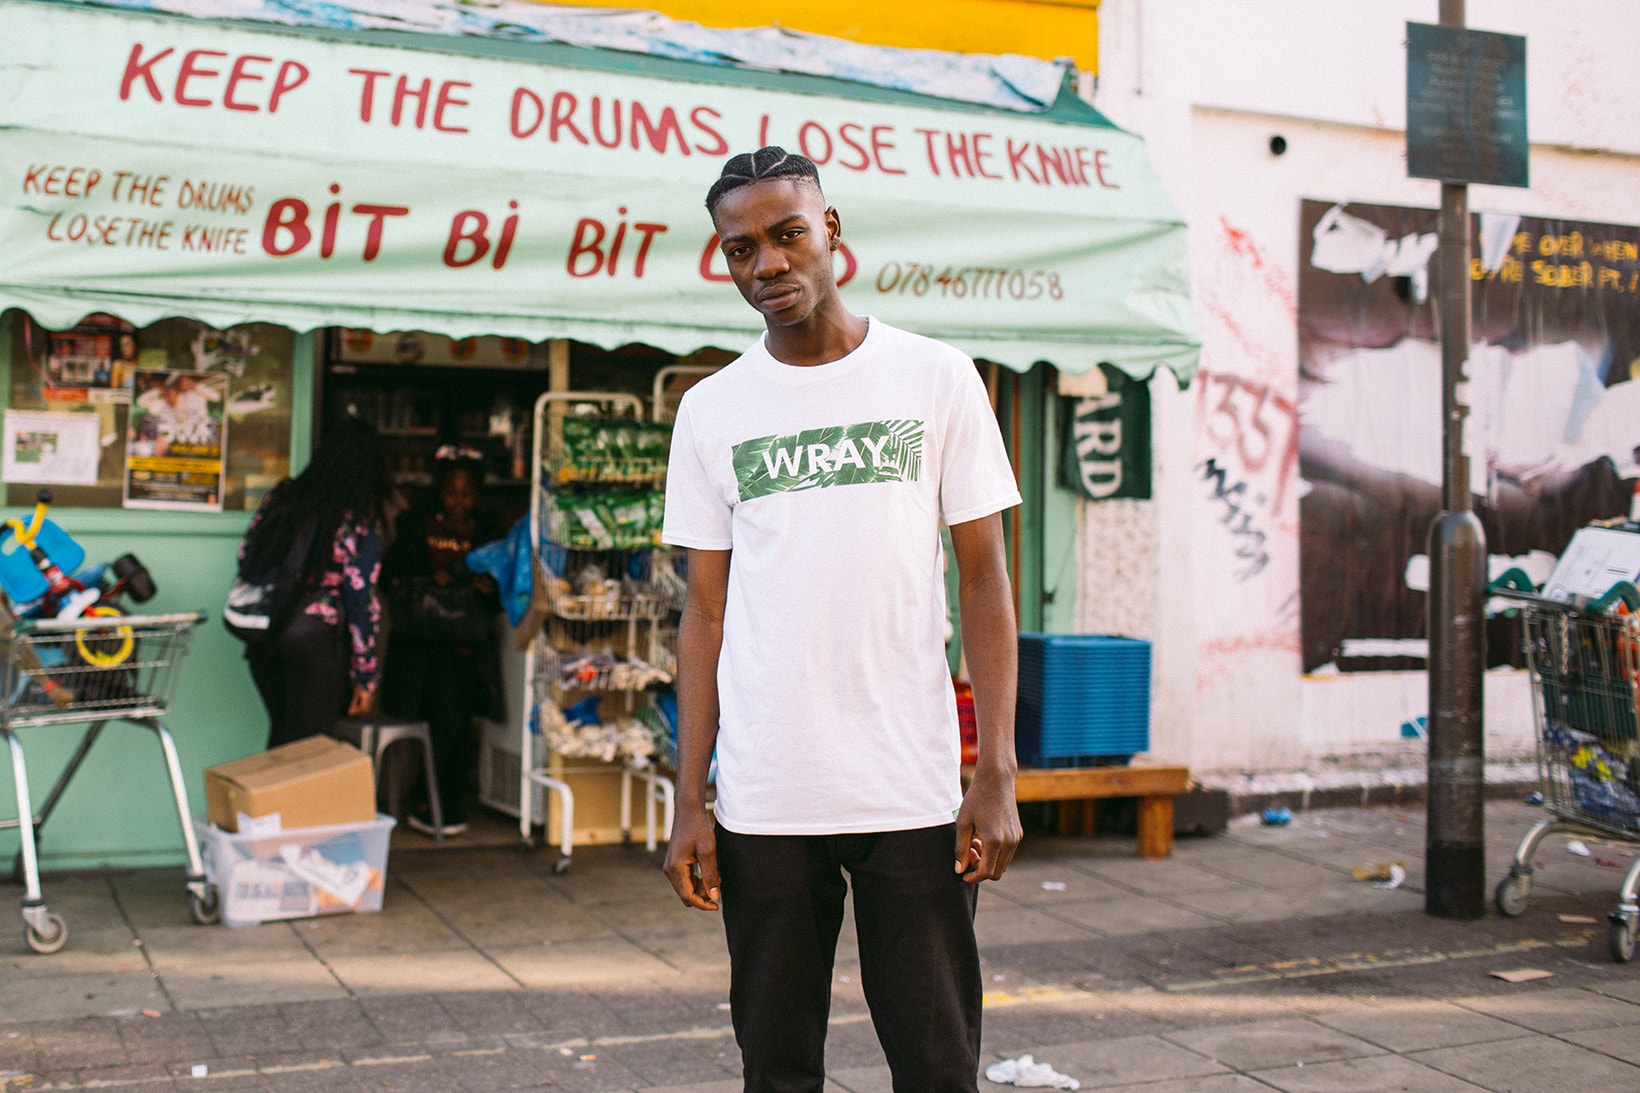 Wray and Nephew 'Wray's Yard Shop' Collection